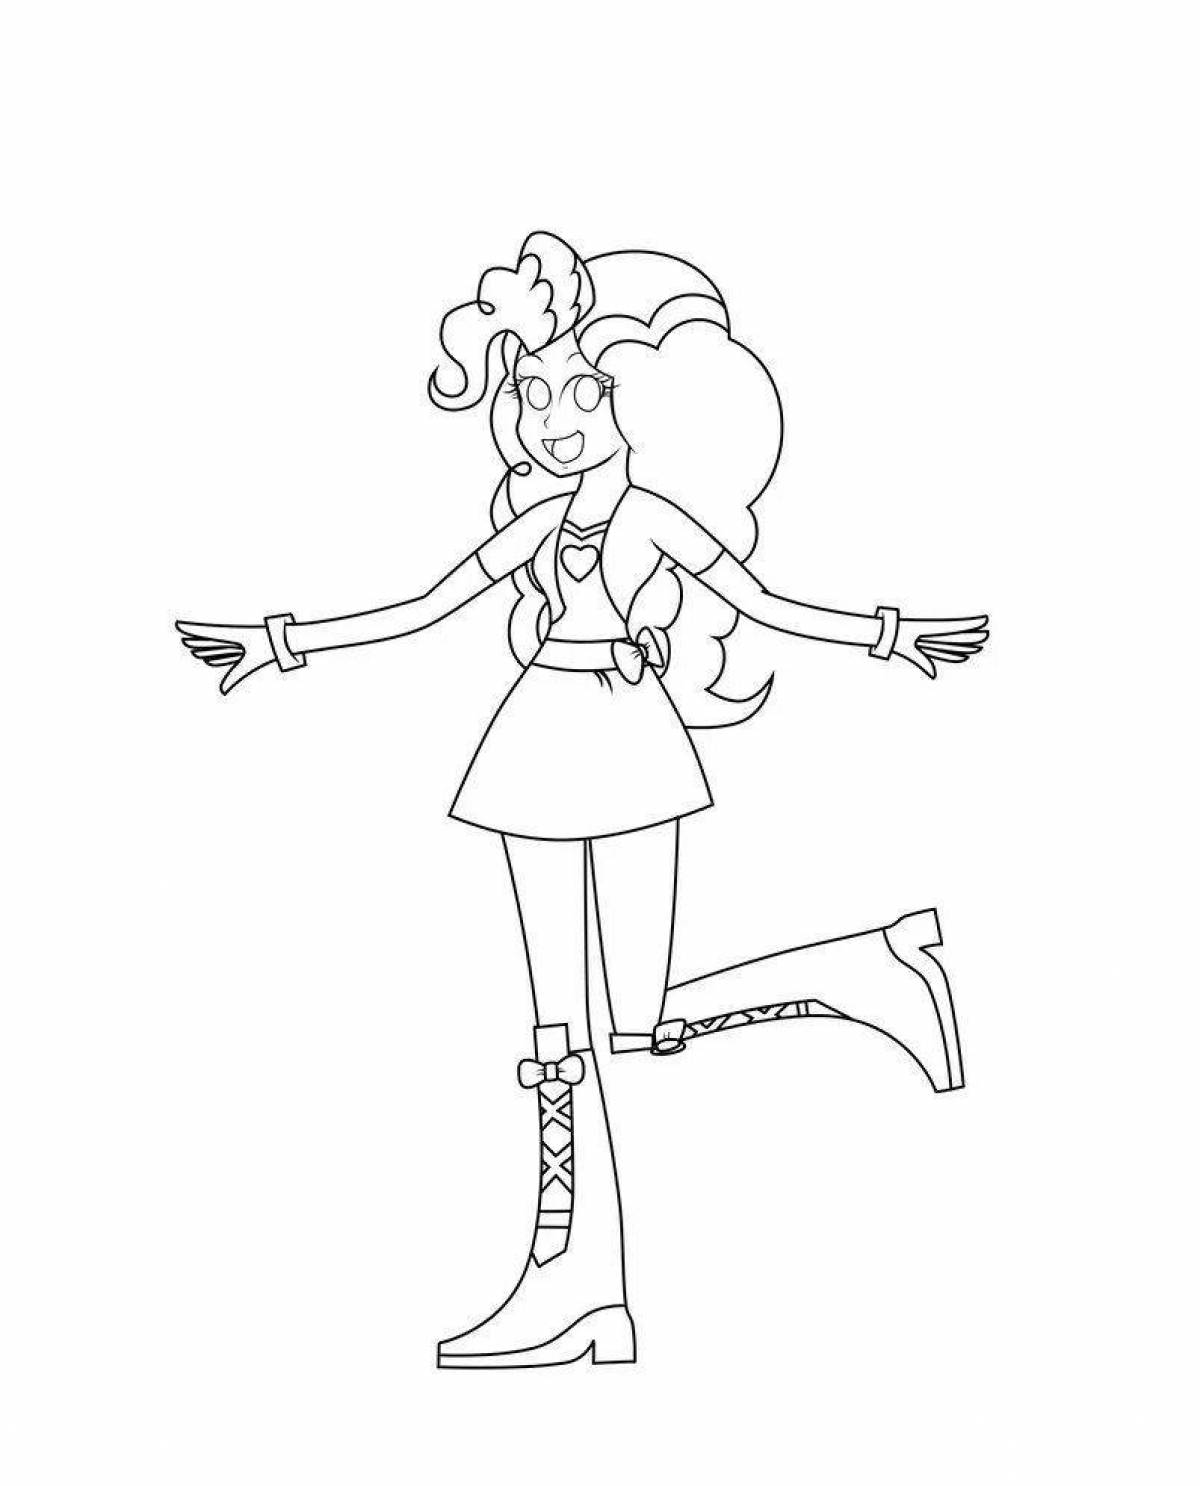 Pinkie Pie Charming Equestria Girls Coloring Page